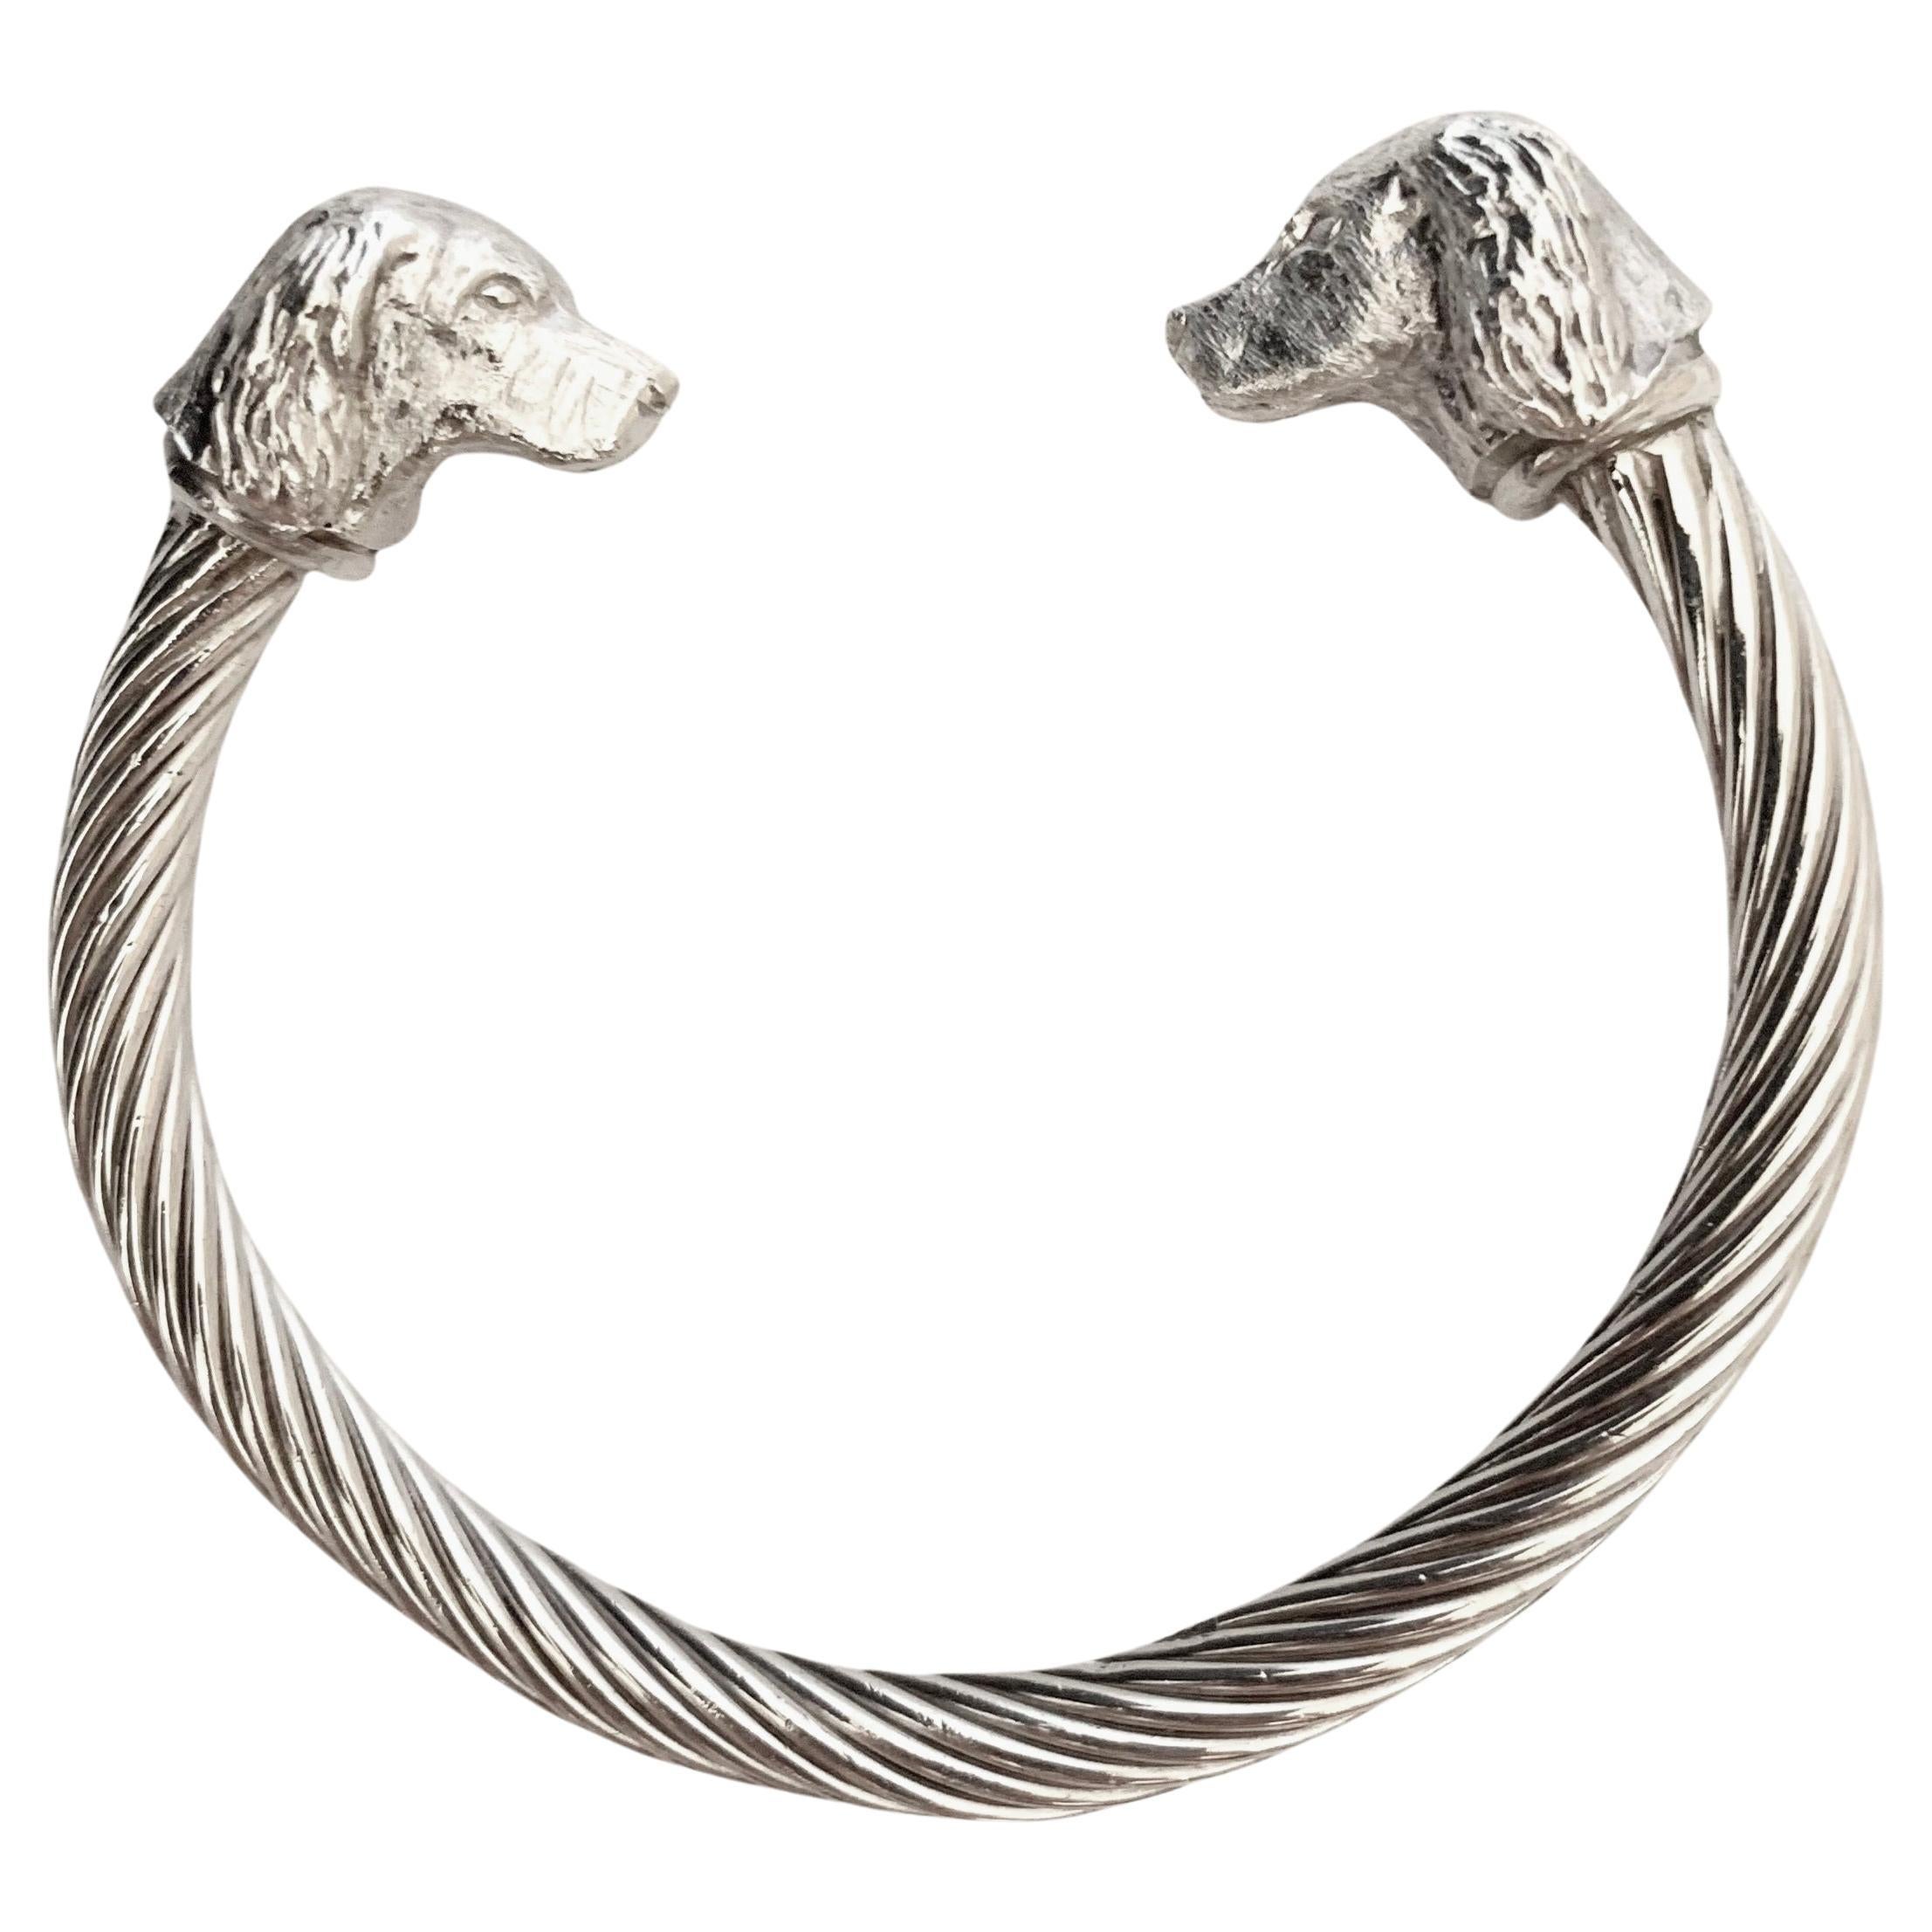 Paul Eaton Sculpted Spaniel Heads on Sterling Silver Twisted Bangle Bracelet For Sale